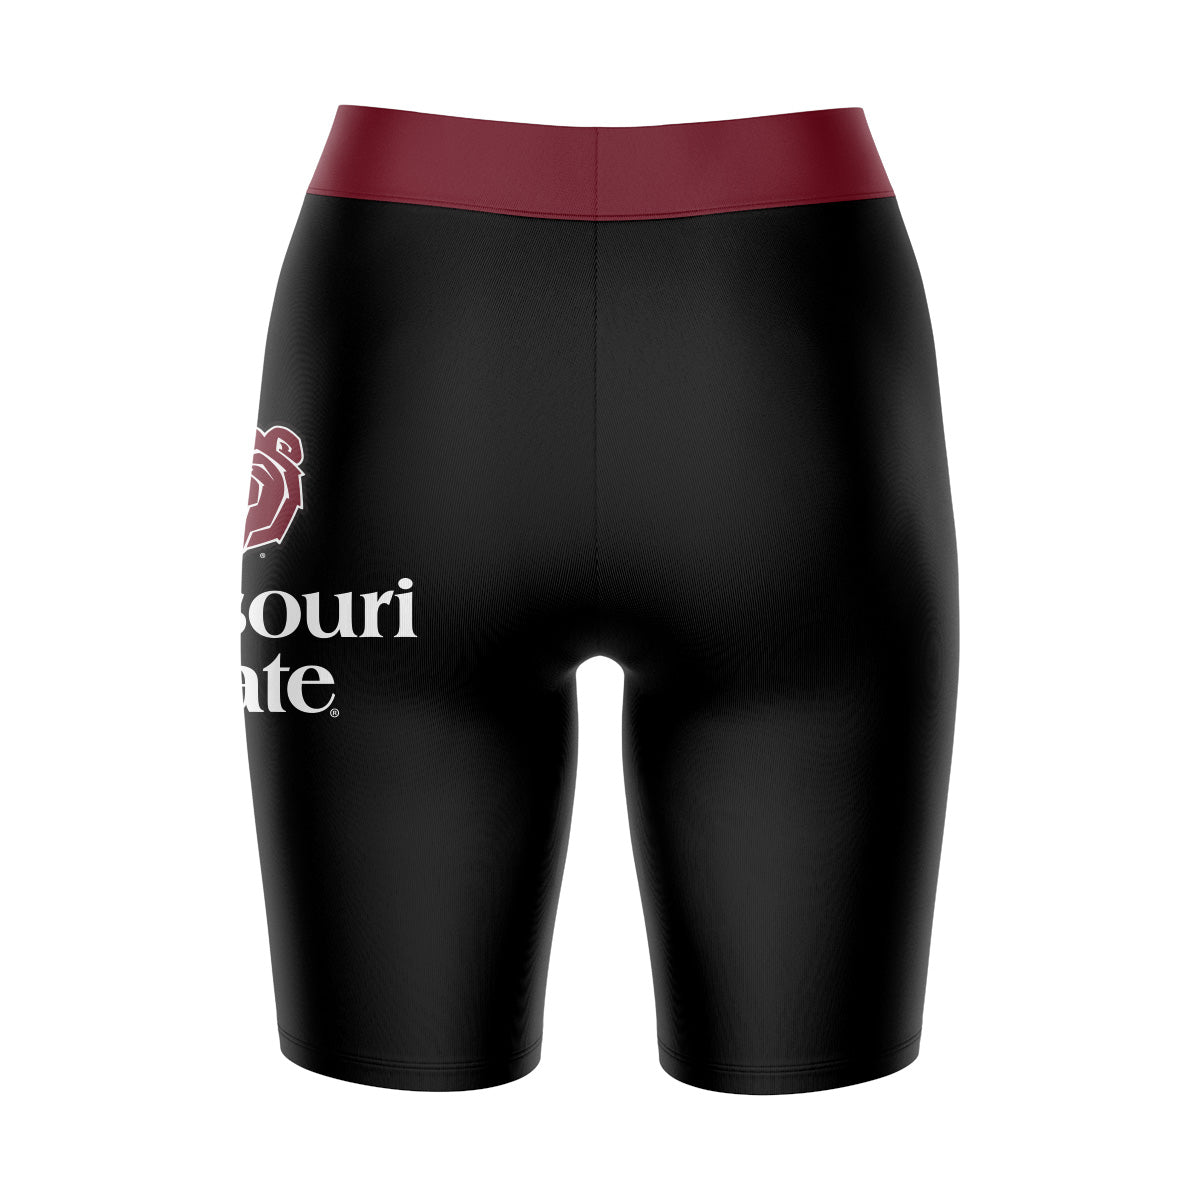 Missouri State Bears Vive La Fete Game Day Logo on Thigh and Waistband Black and Maroon Women Bike Short 9 Inseam"